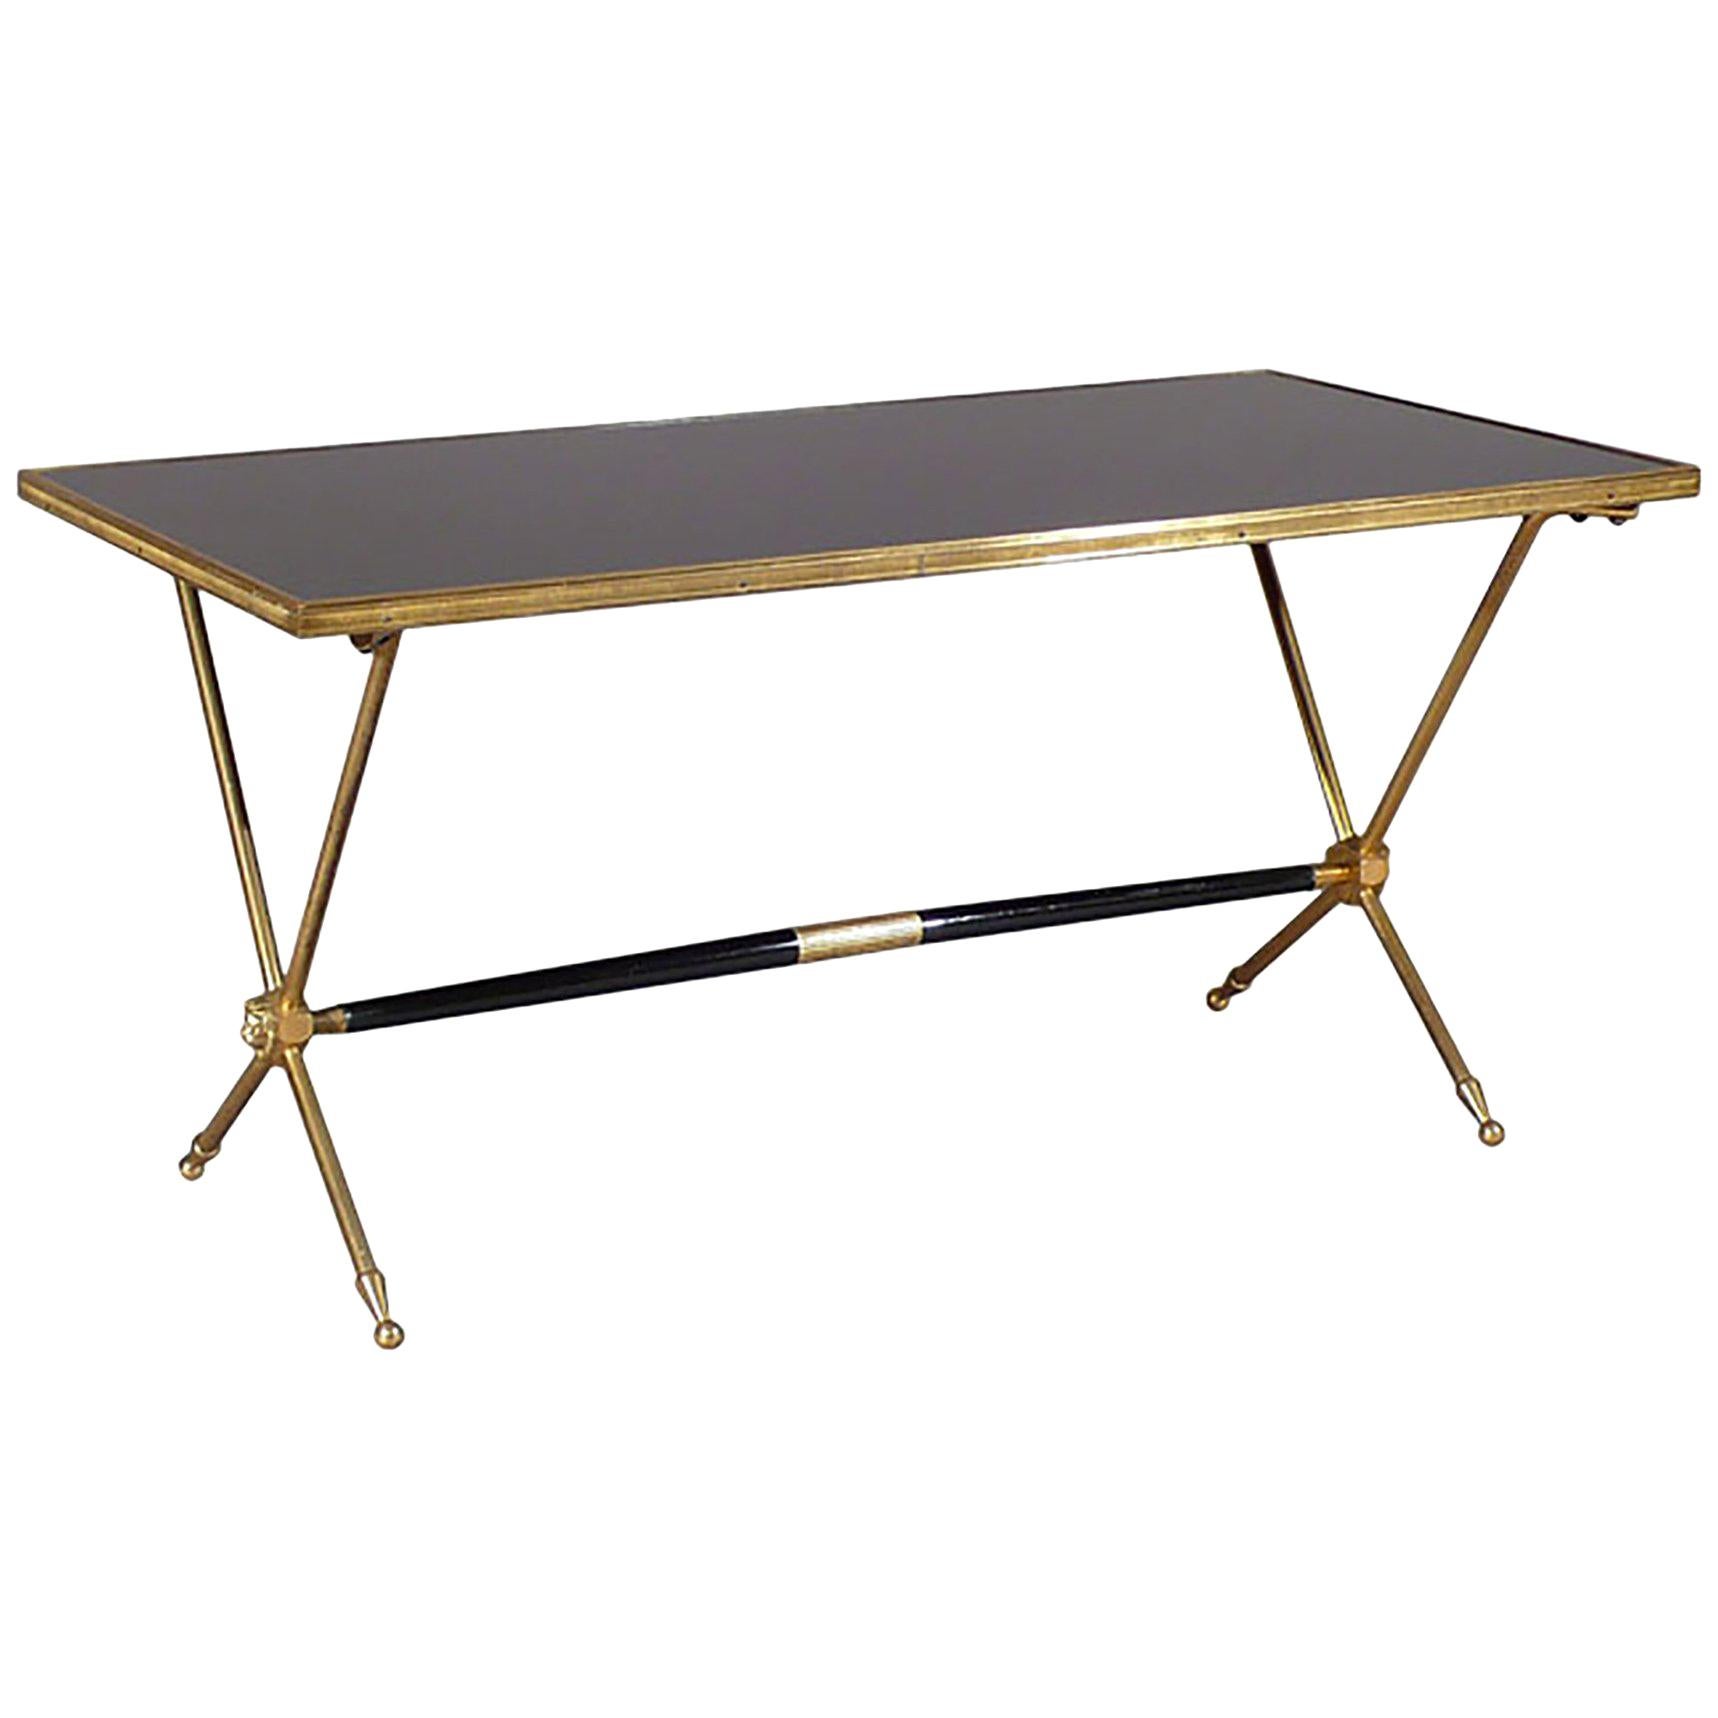 The black opaline surface of this coffee table appears reflective, calling to mind a still POOL of deep water, the result being a luxurious, timeless piece that, coupled with the intriguing brass lion head details, imbues any space with a sense of